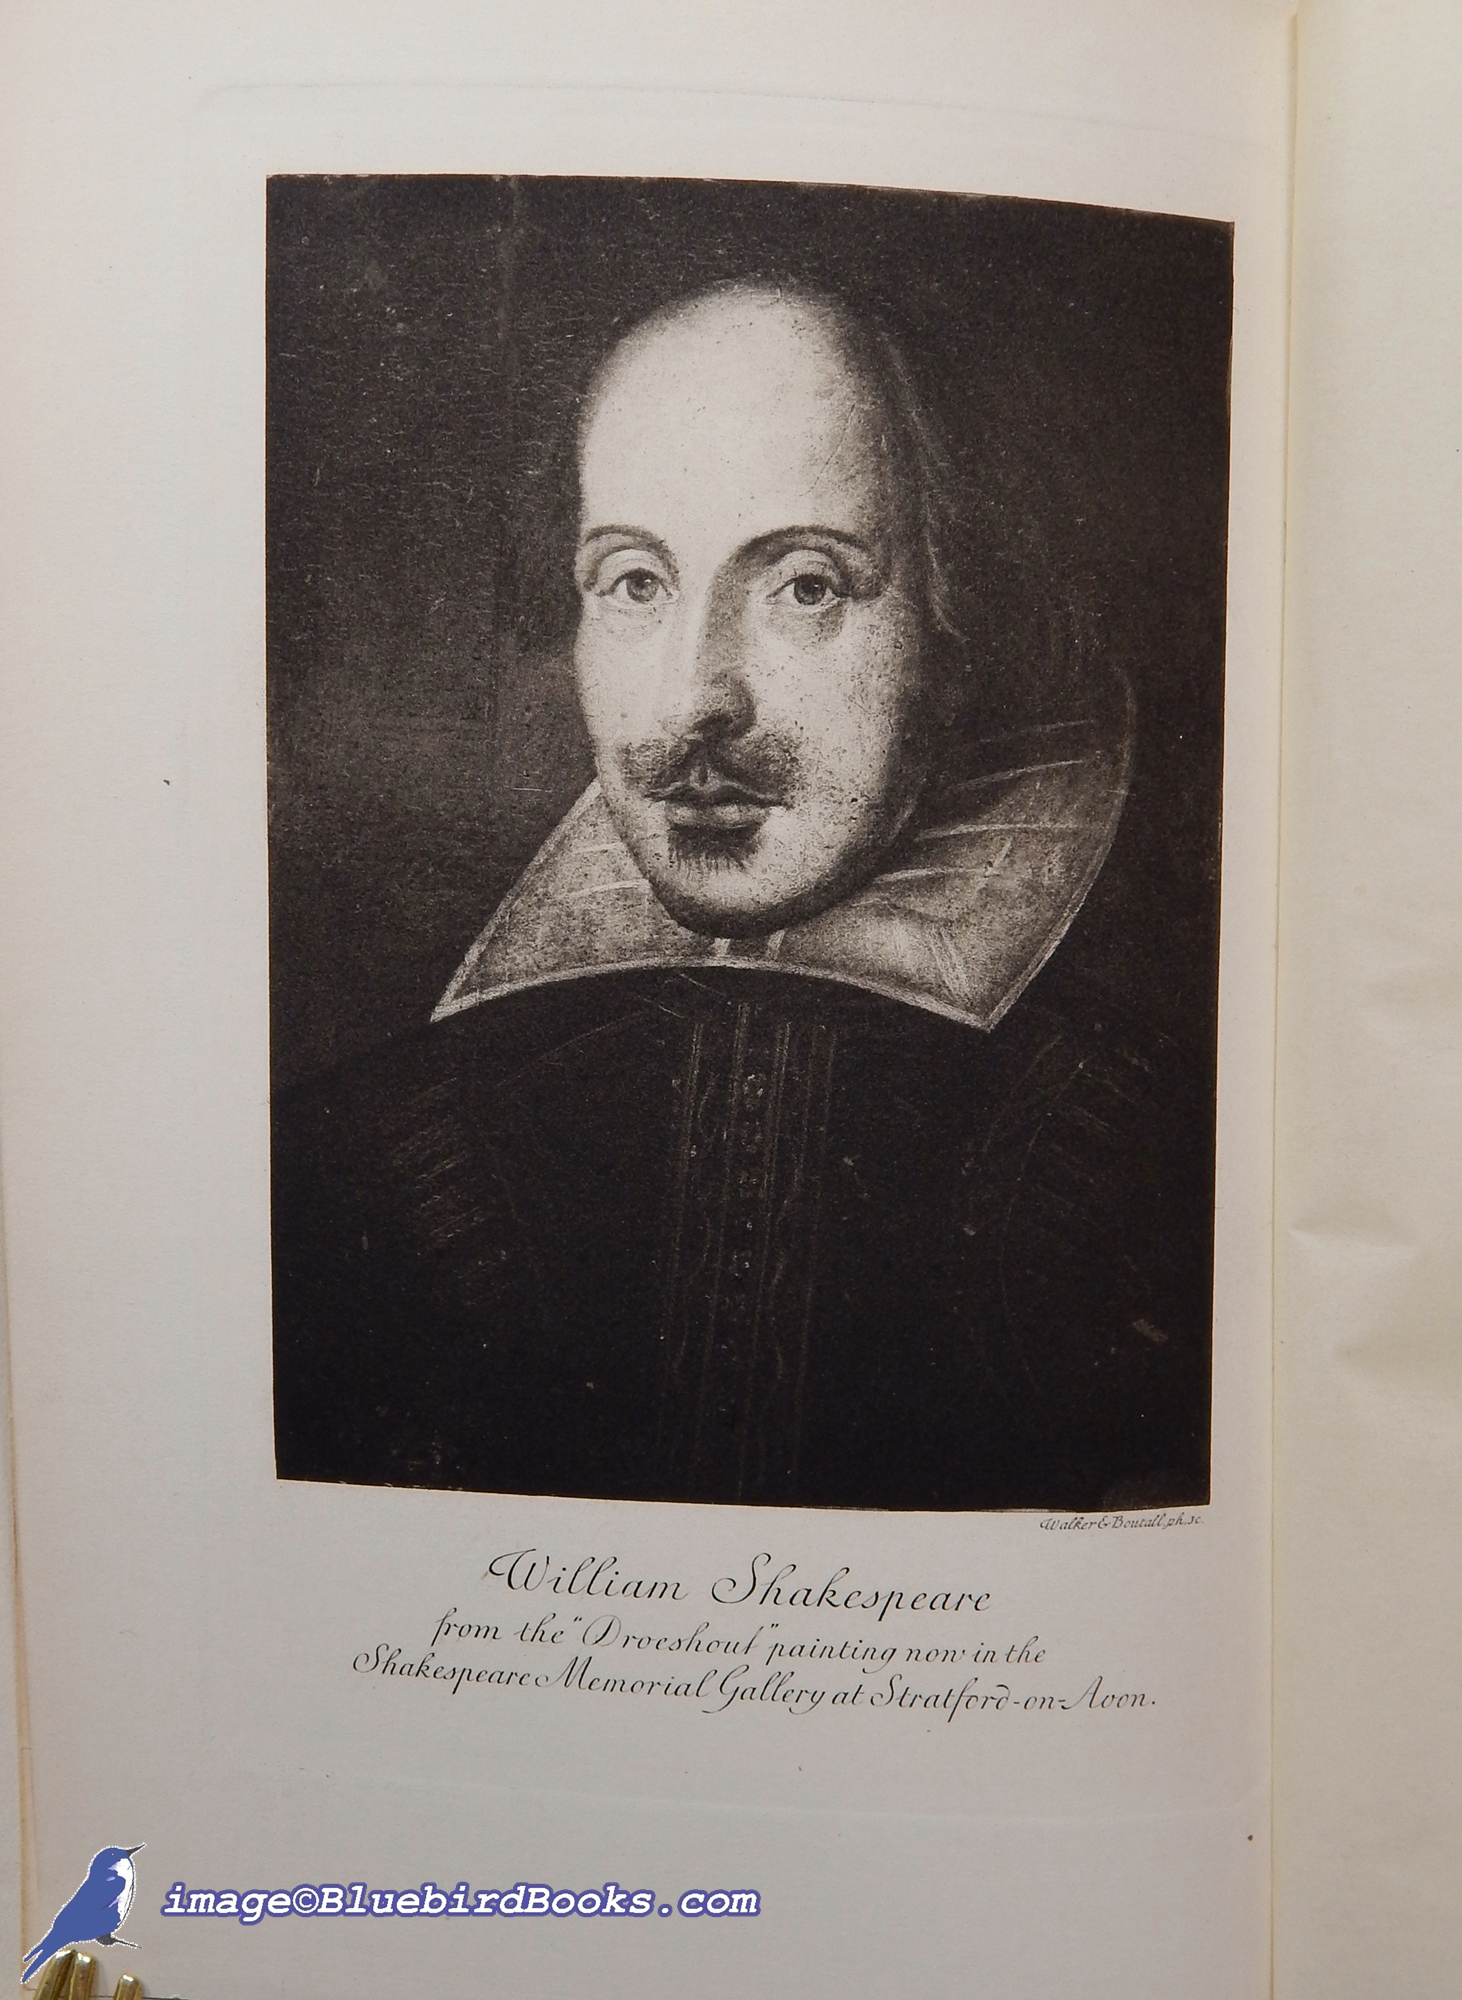 LEE, SIDNEY - A Life of William Shakespeare